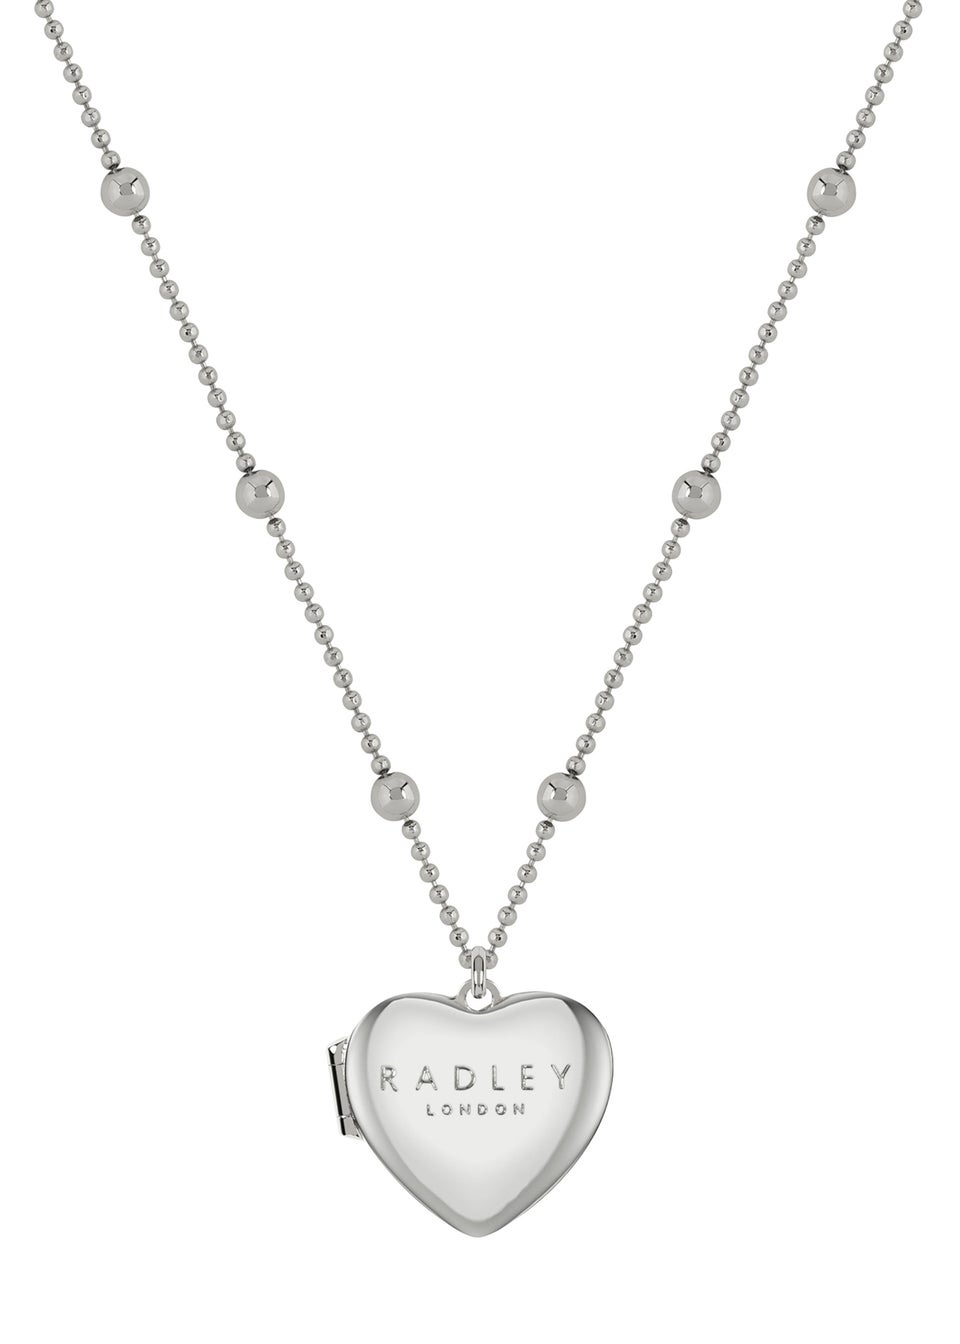 Radley London Silver Plated Bobble Chain Heart Locket Necklace